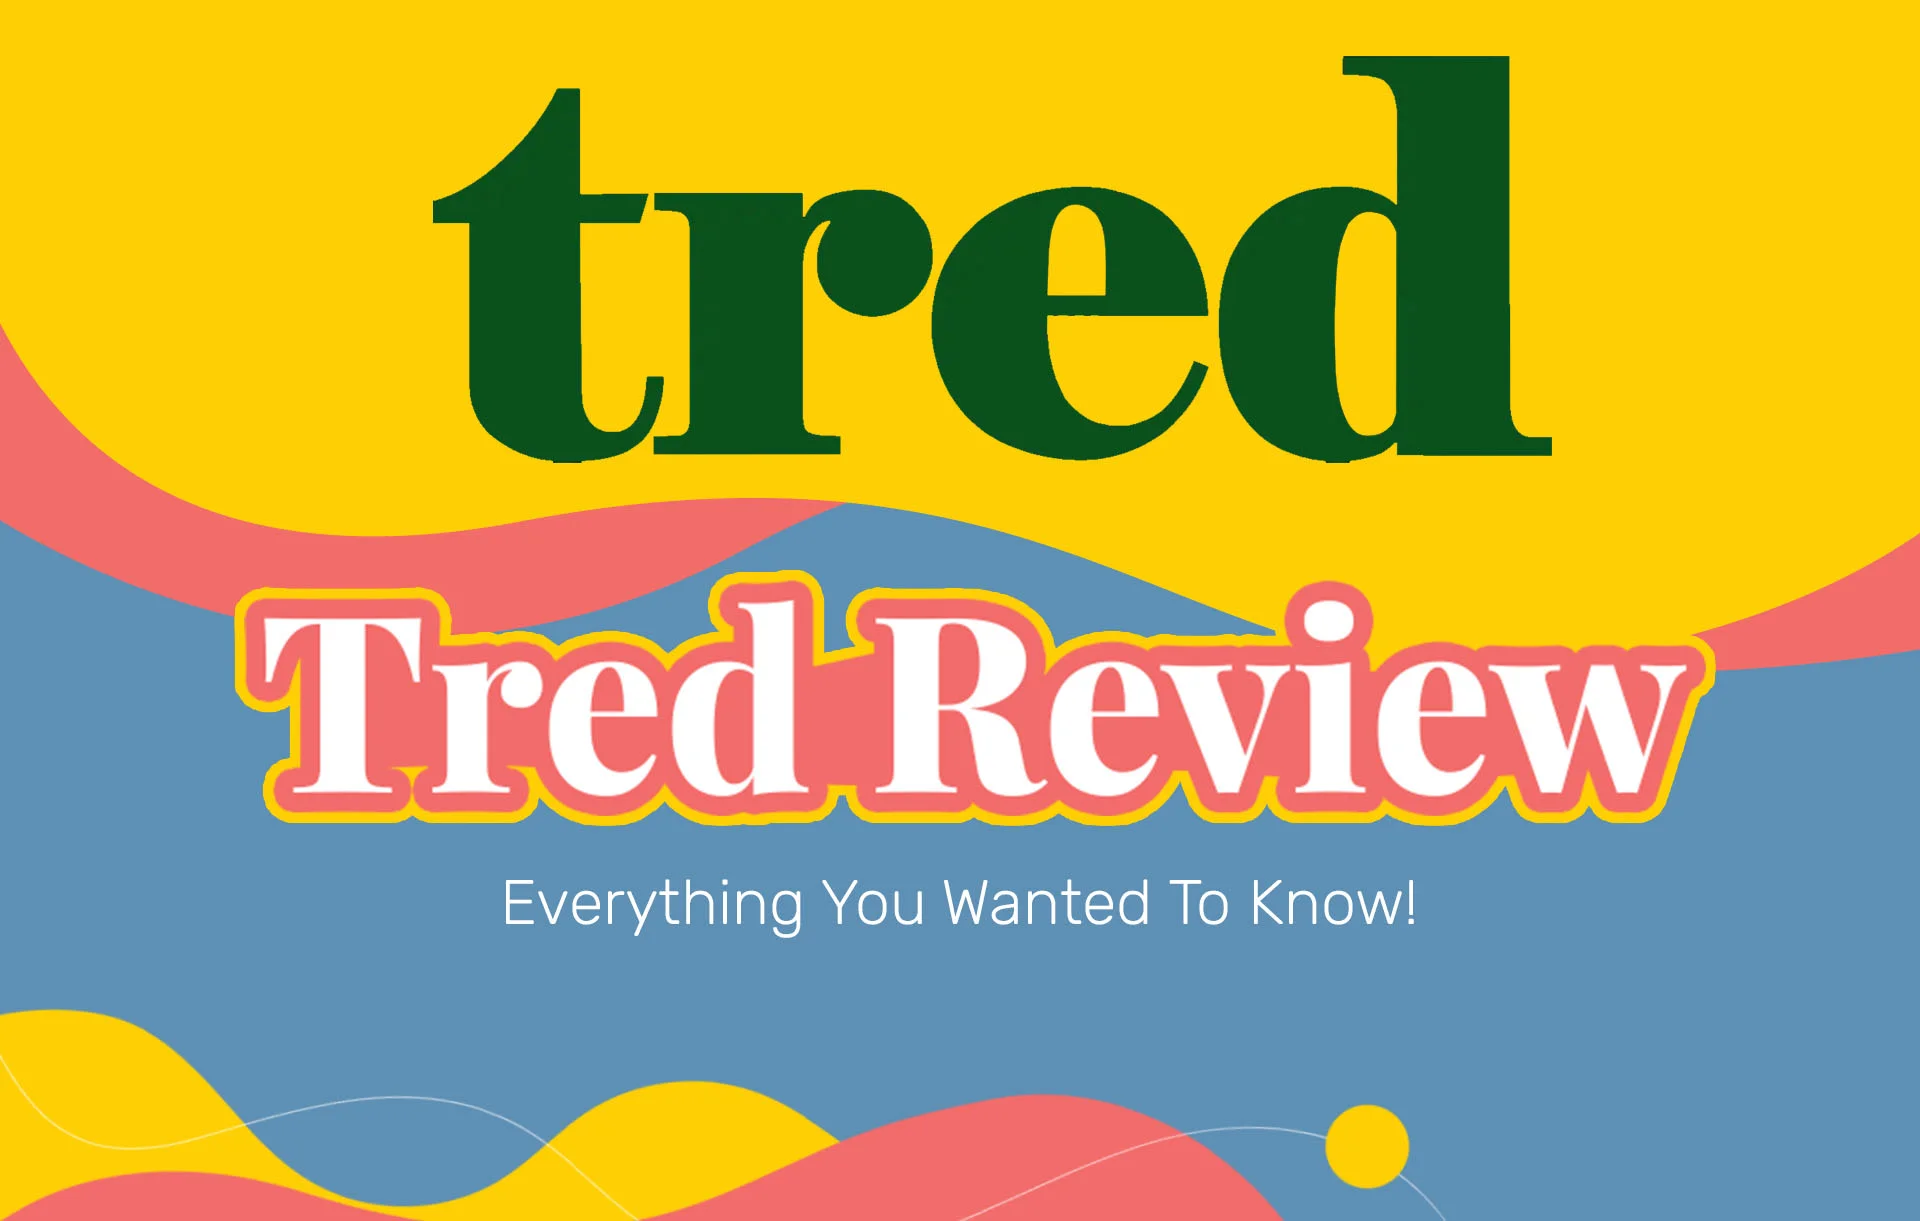 Tred Reviews: Best Car Sales Training?